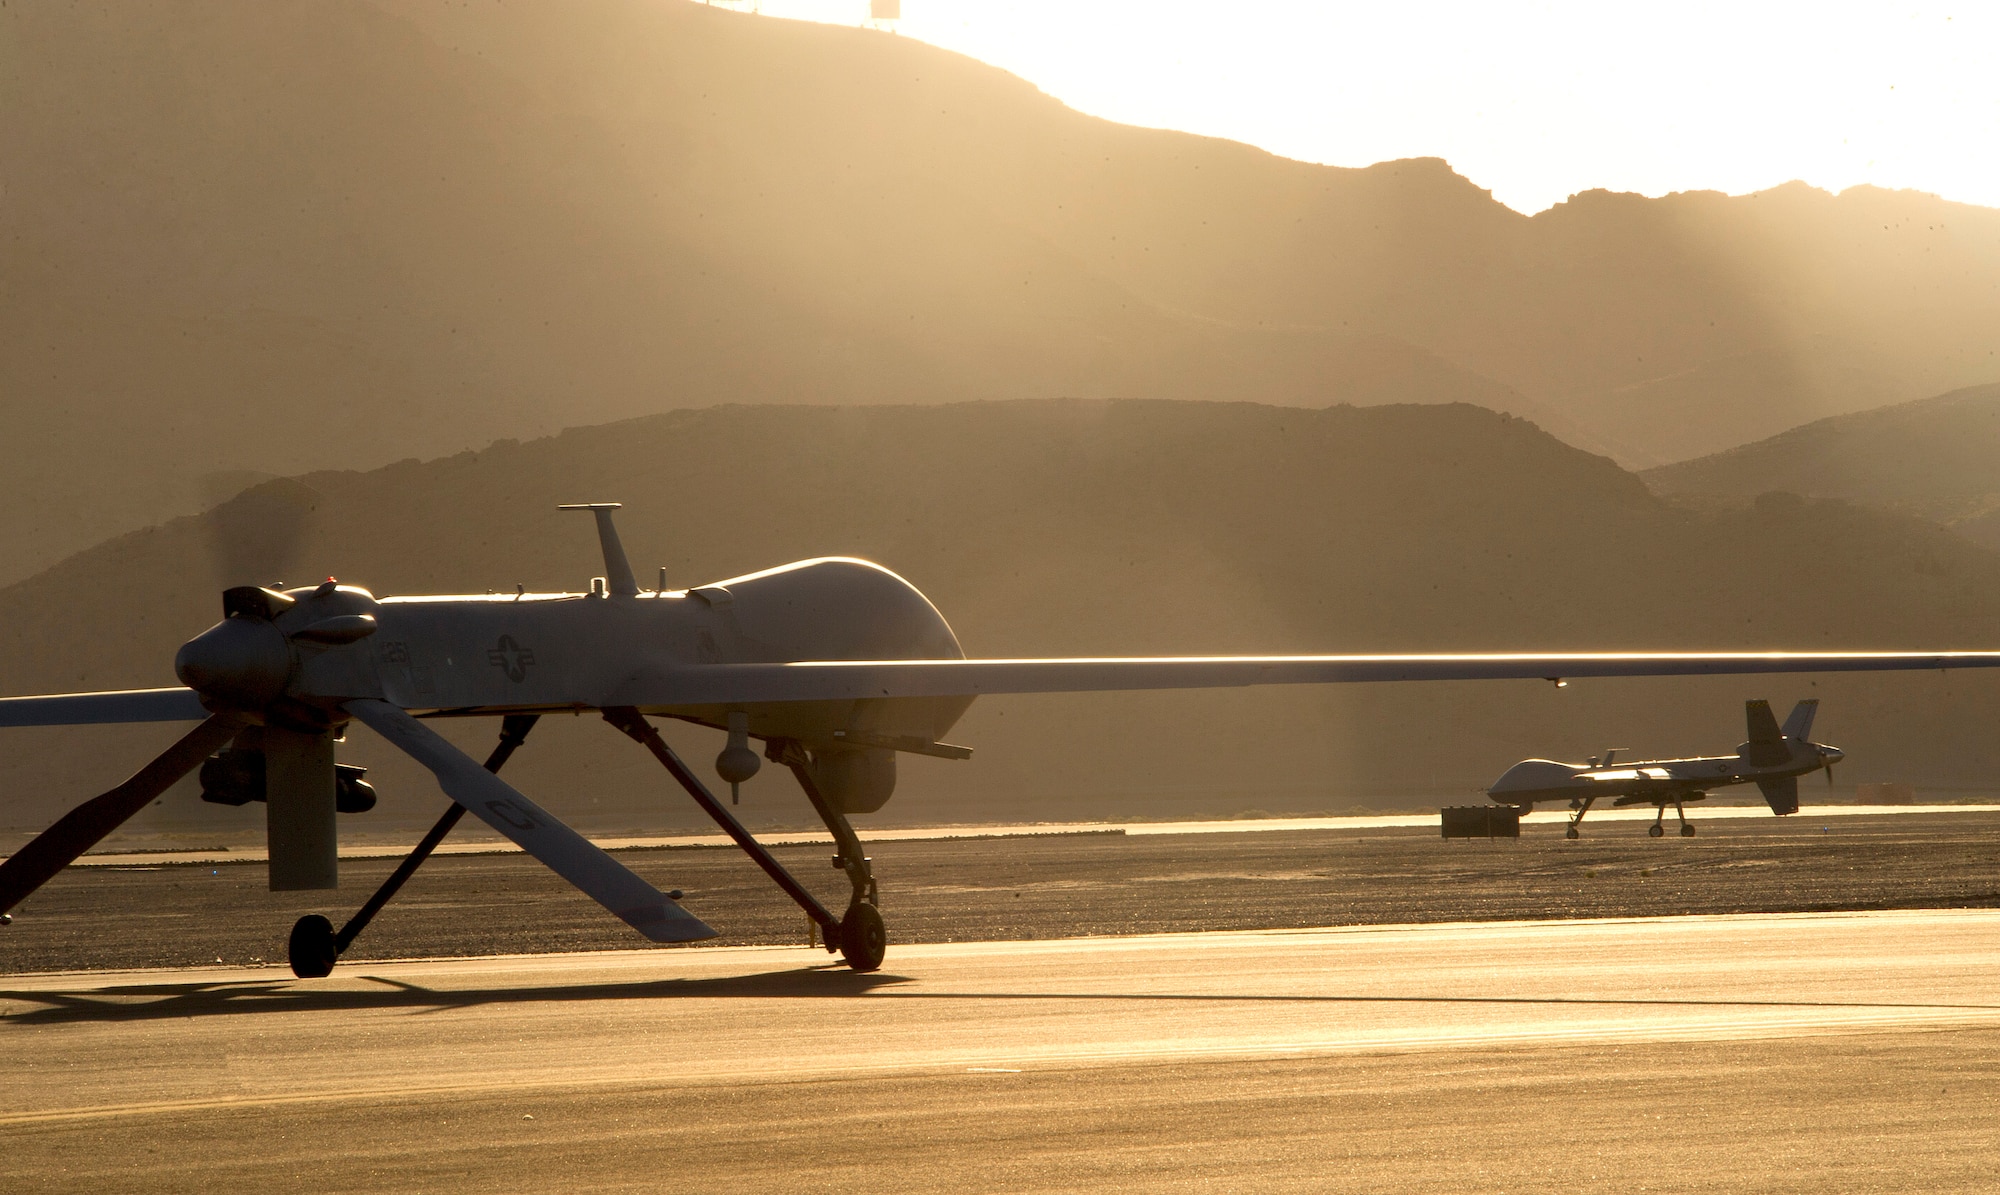 An MQ-1B Predator, left, and an MQ-9 Reaper taxi to the runway in preparation for takeoff June 13, 2014, on Creech Air Force Base, Nev. The aircraft are assigned to the 432nd Wing, which trains pilots, sensor operators and other remotely piloted aircraft crewmembers, and conducts combat surveillance and attack operations worldwide. (U.S. Air Force photo/Airman 1st Class Christian Clausen)